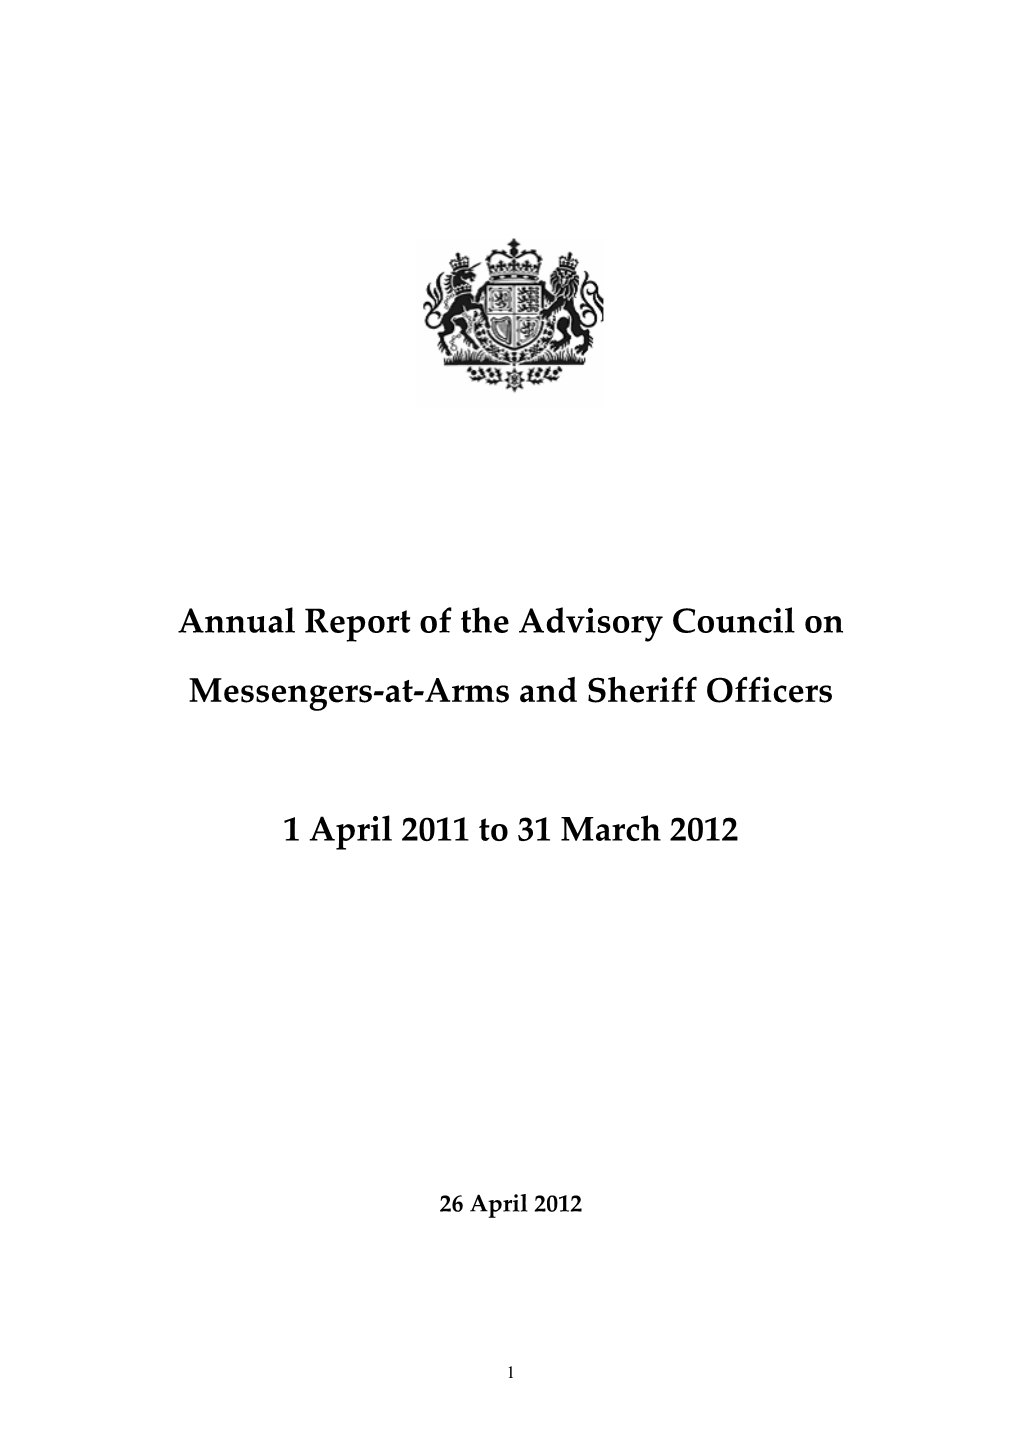 Annual Report of the Advisory Council on Messengers-At-Arms and Sheriff